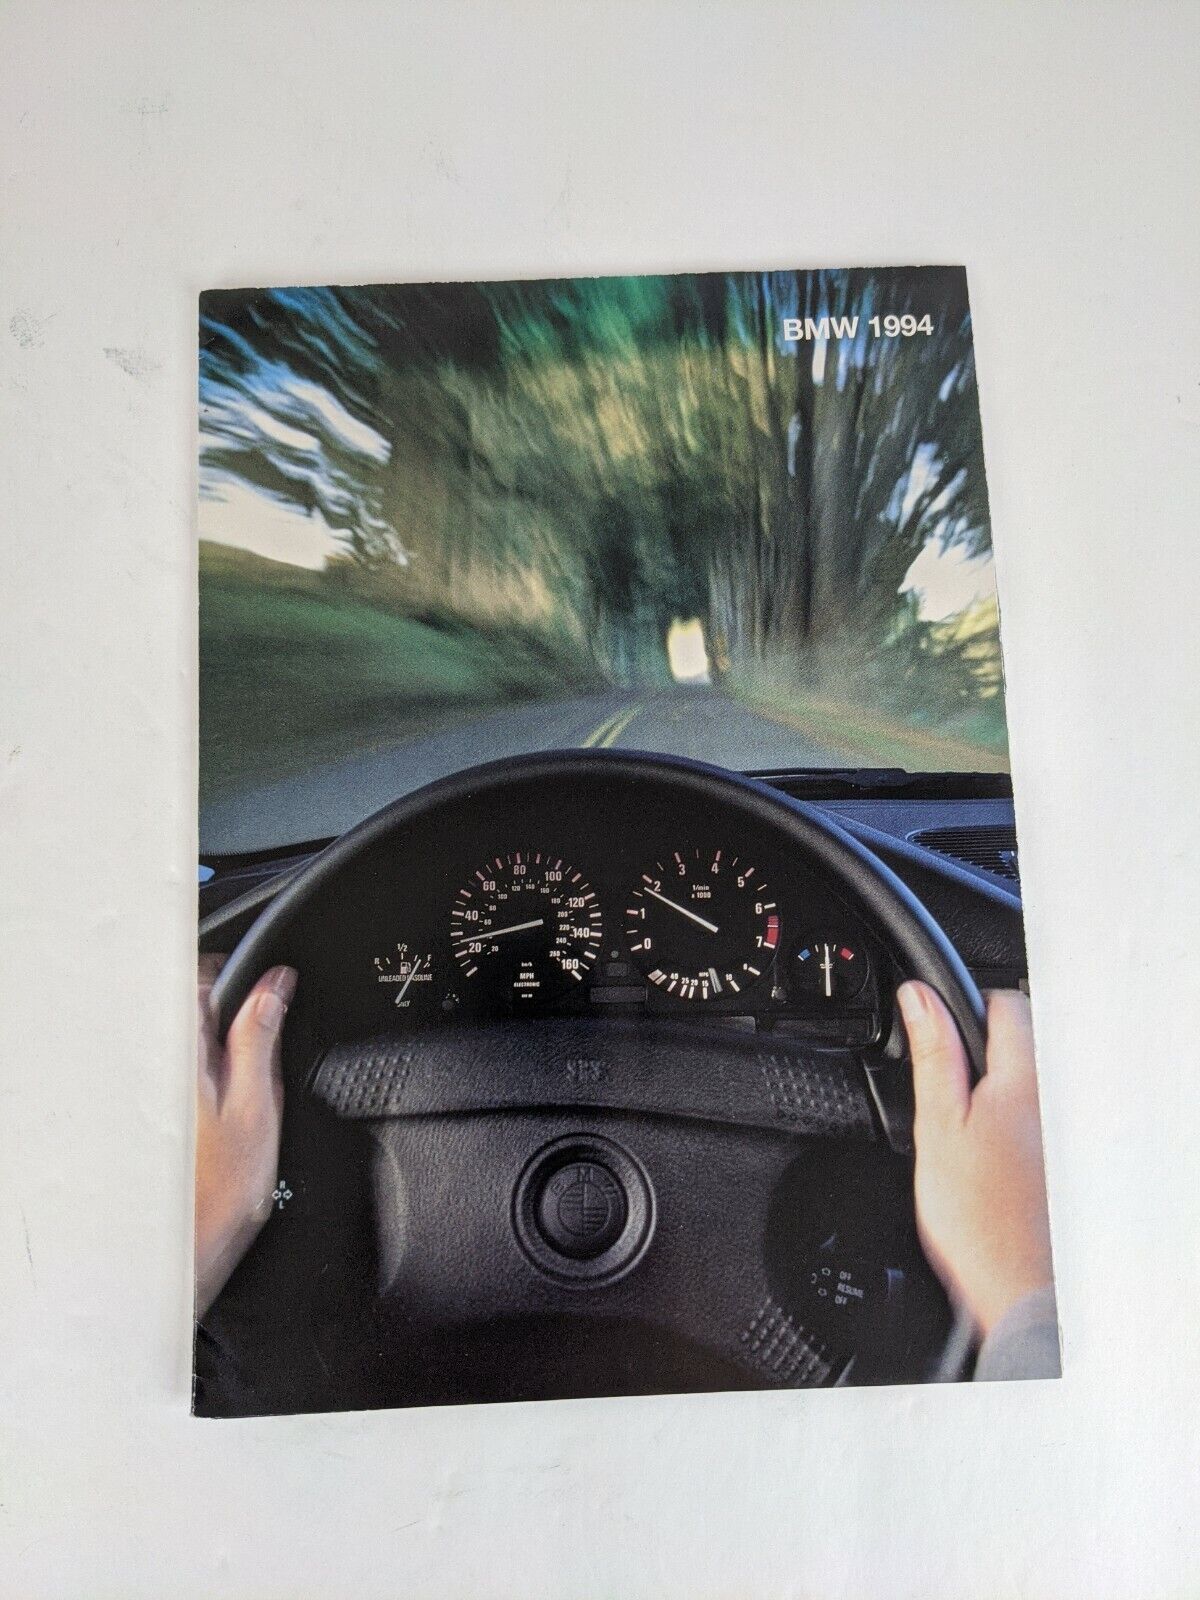 1994 BMW Brochure with 325i Convertible Poster VTG Euro Collector Beamer